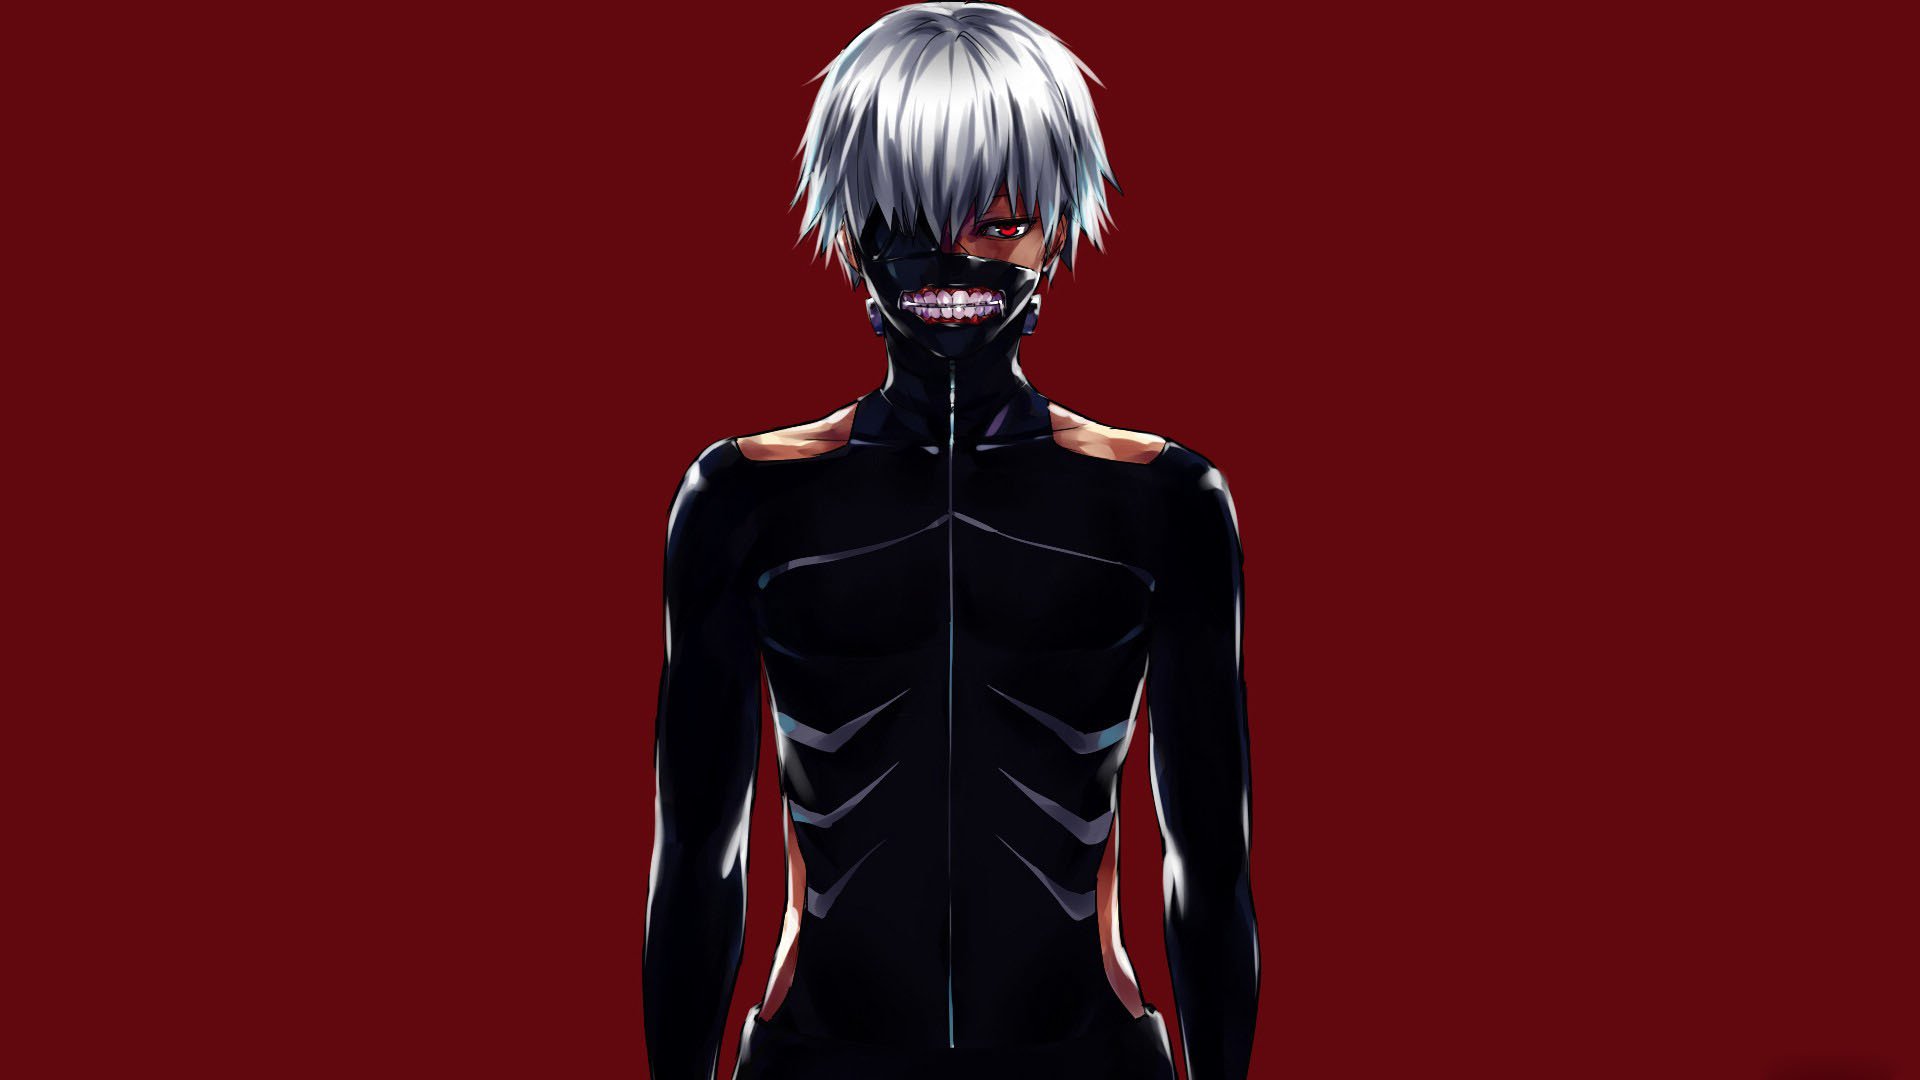 tokyo, Ghoul, Anime, Character, Series, Boy Wallpaper